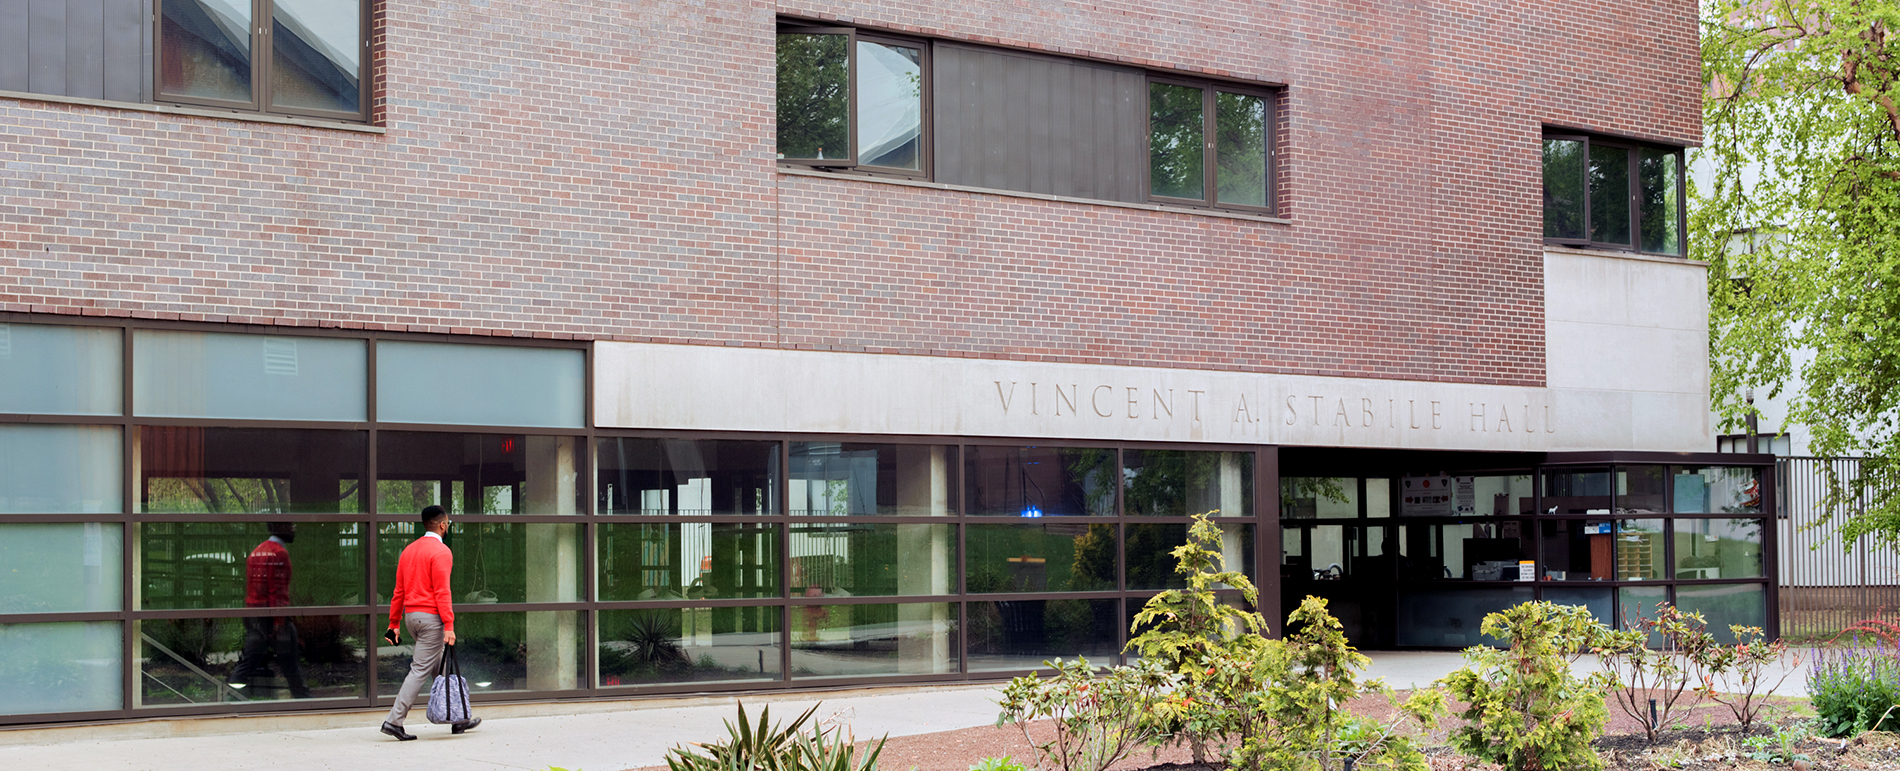 An image of the Vincent A. Stabile Hall's façade as a person walks across in front of it.